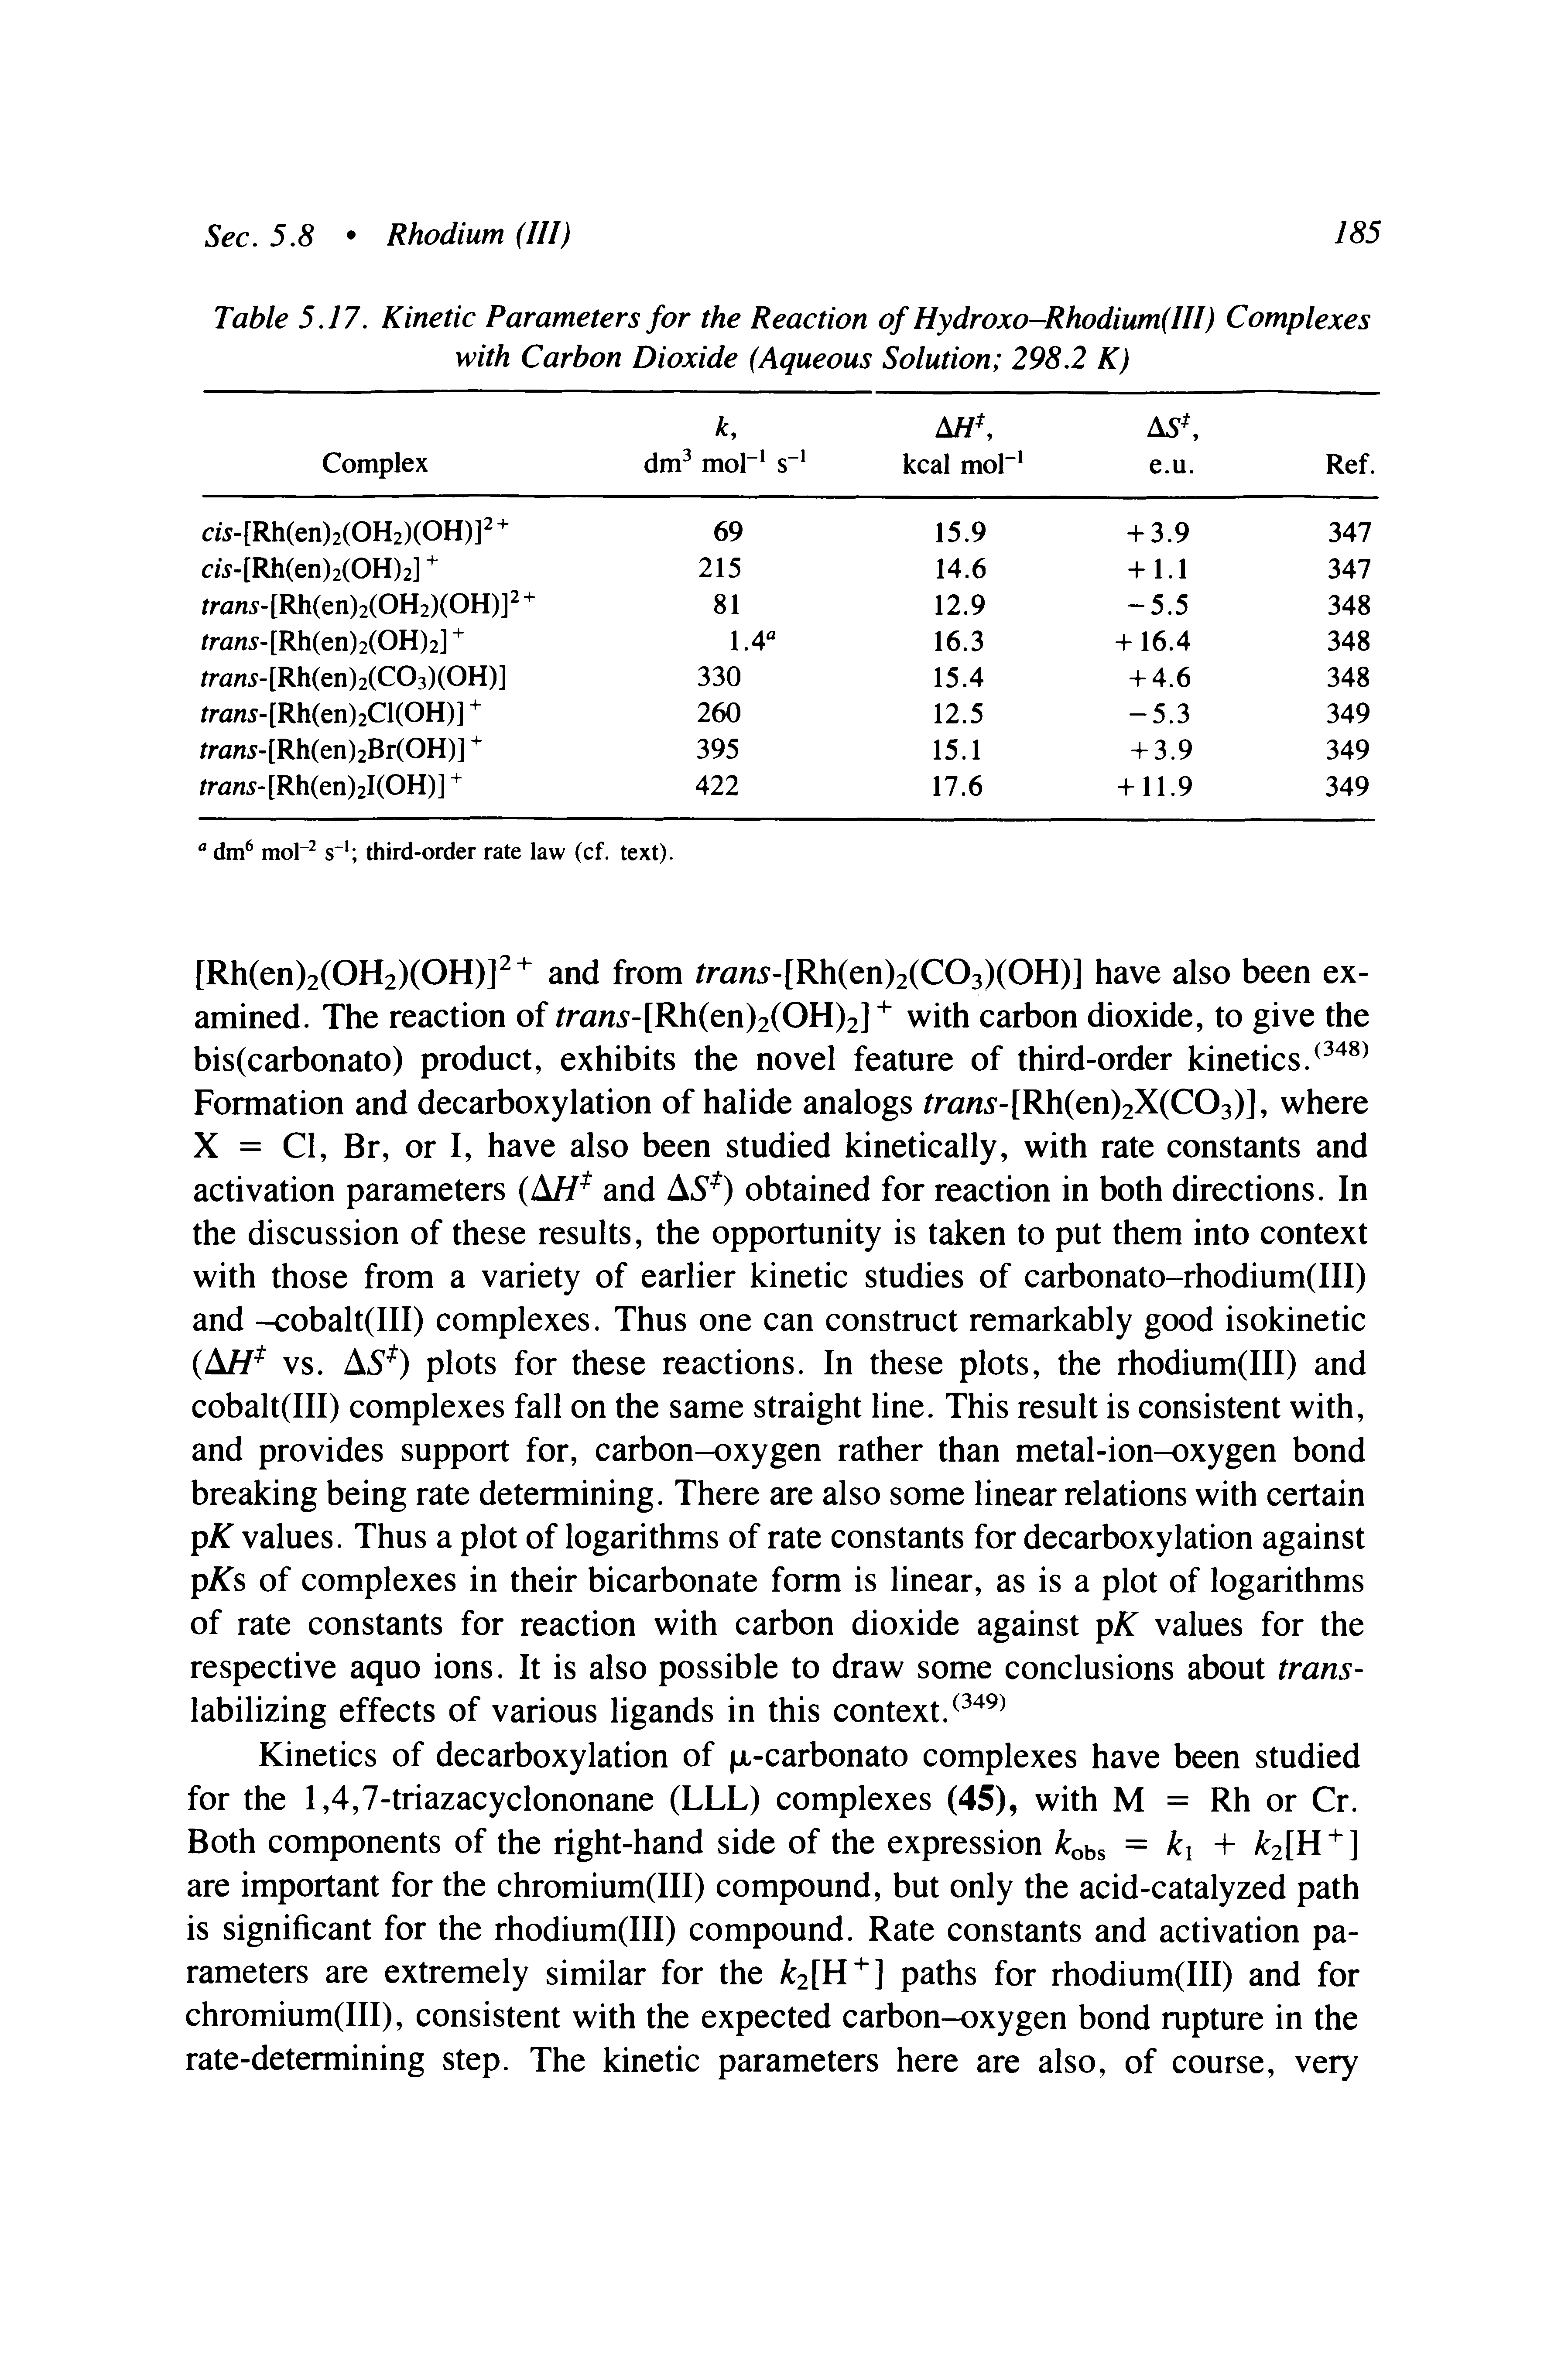 Table 5.17. Kinetic Parameters for the Reaction of Hydroxo-Rhodium(III) Complexes with Carbon Dioxide (Aqueous Solution 298.2 K)...